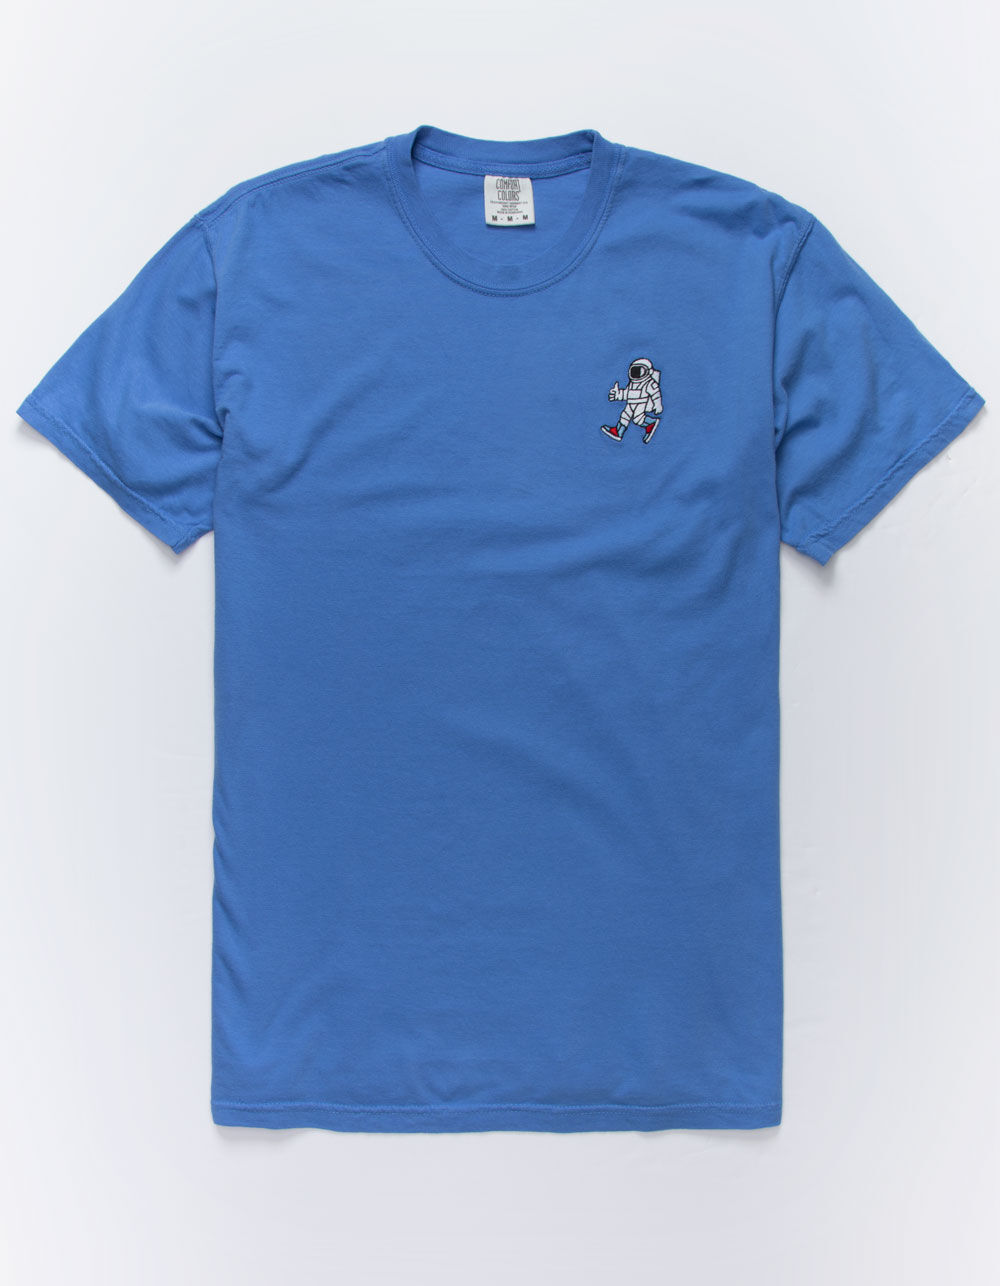 RIOT SOCIETY Spaceman Kicks Embroidered Mens T-Shirt - BLUE | Tillys